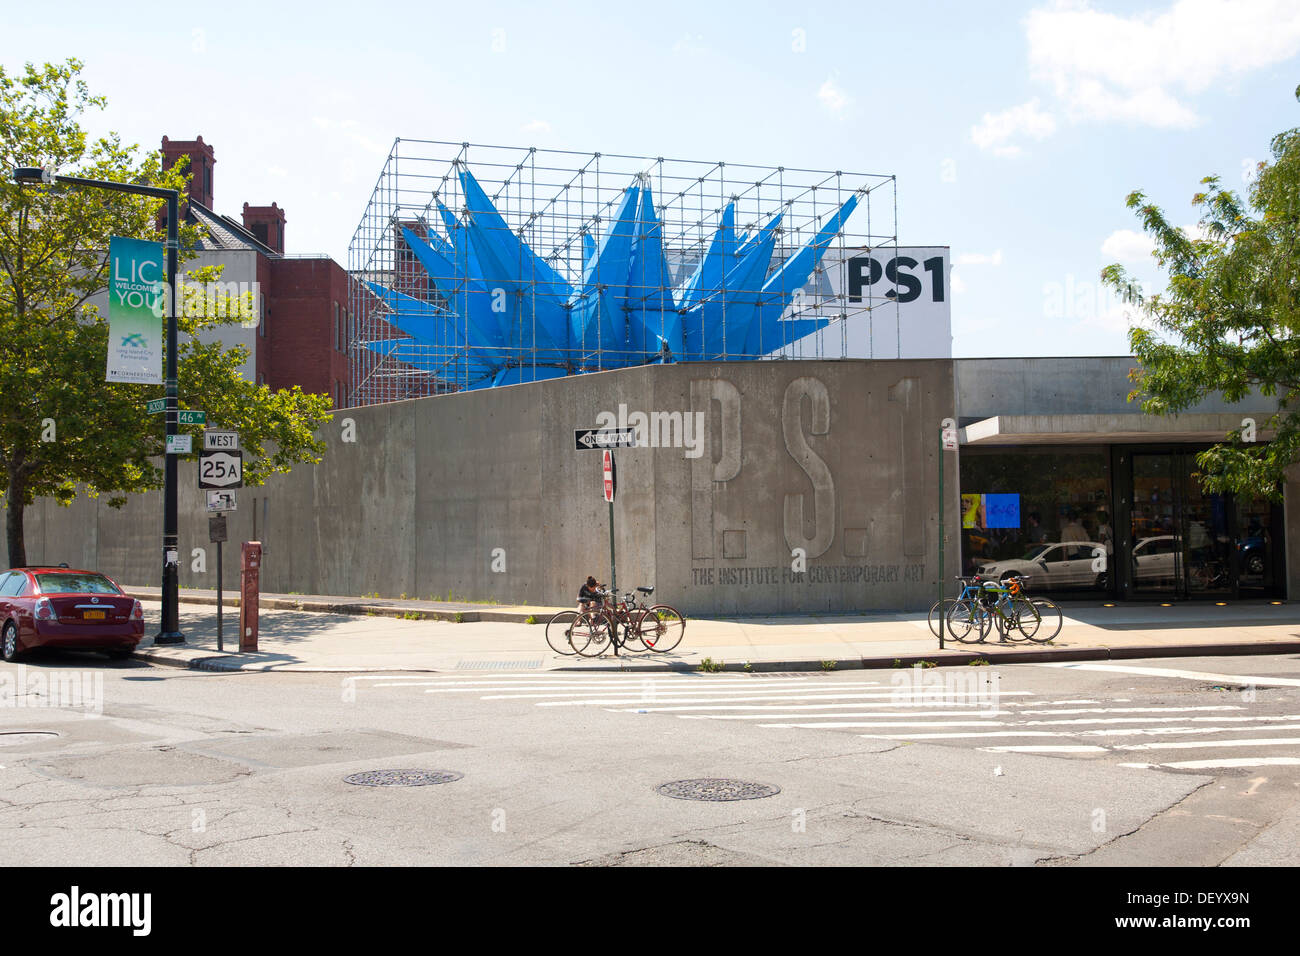 PS1, Institute for Contemporary Art, branch of MoMA, Museum of Modern Art, Queens, New York City, USA Stock Photo